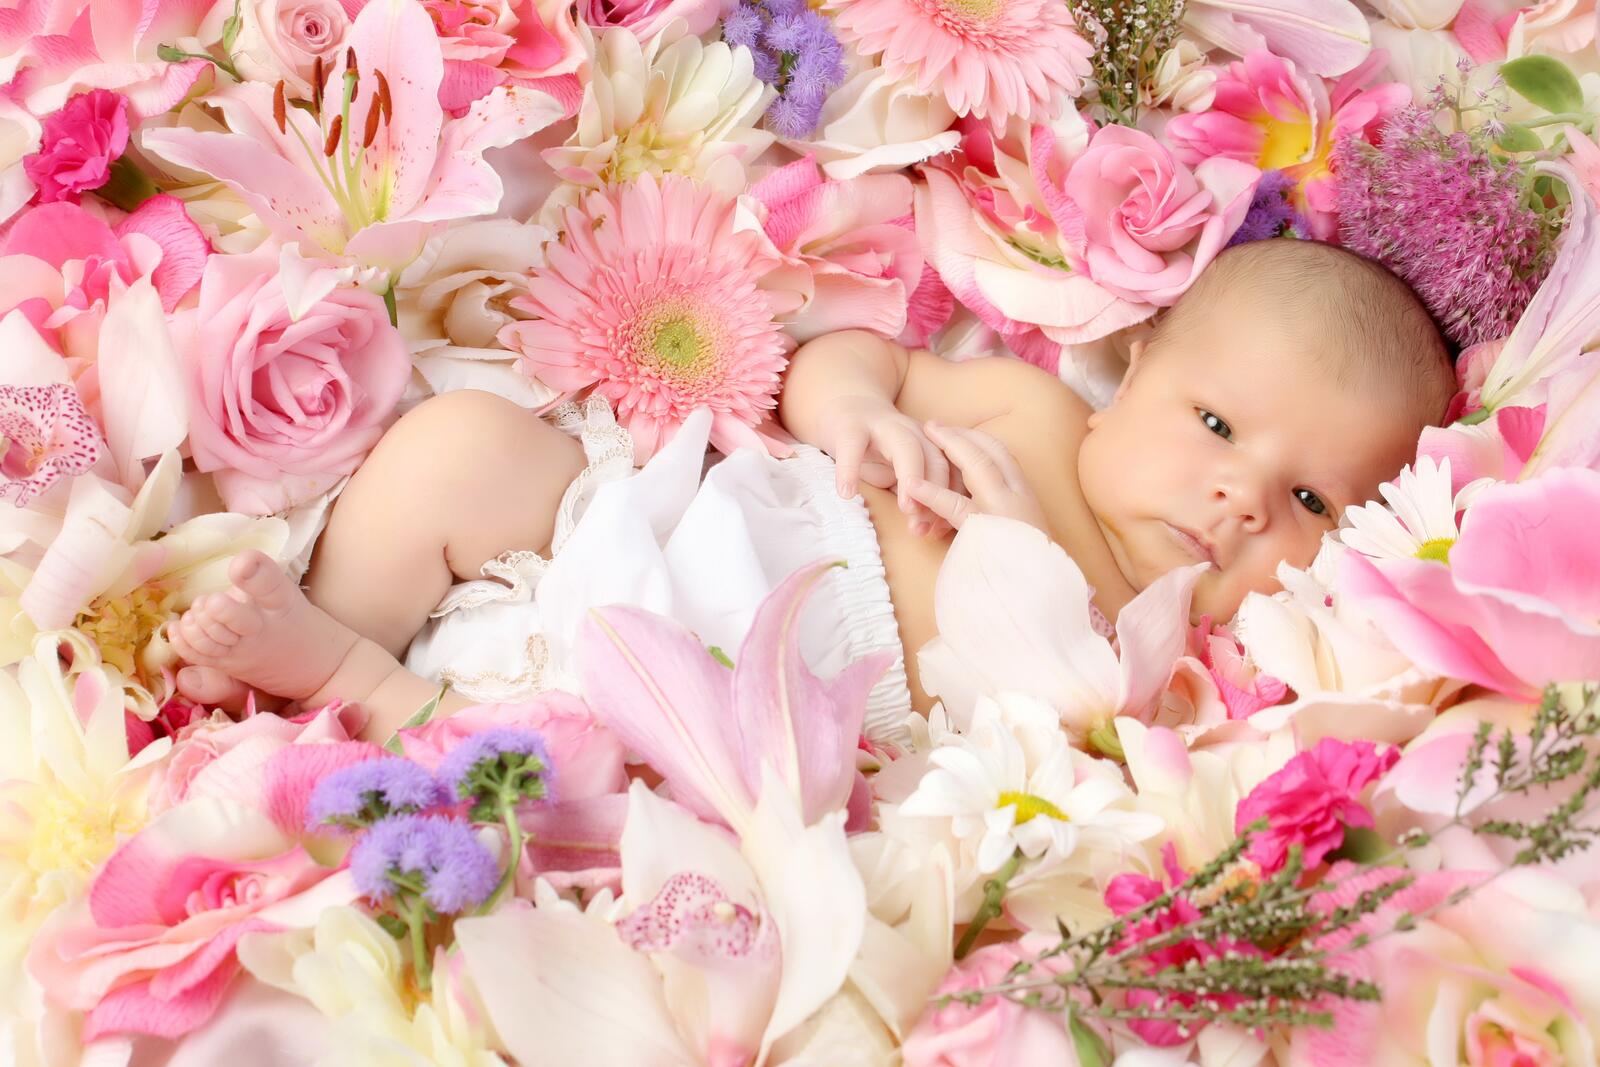 Free photo A newborn baby lies in the flowers